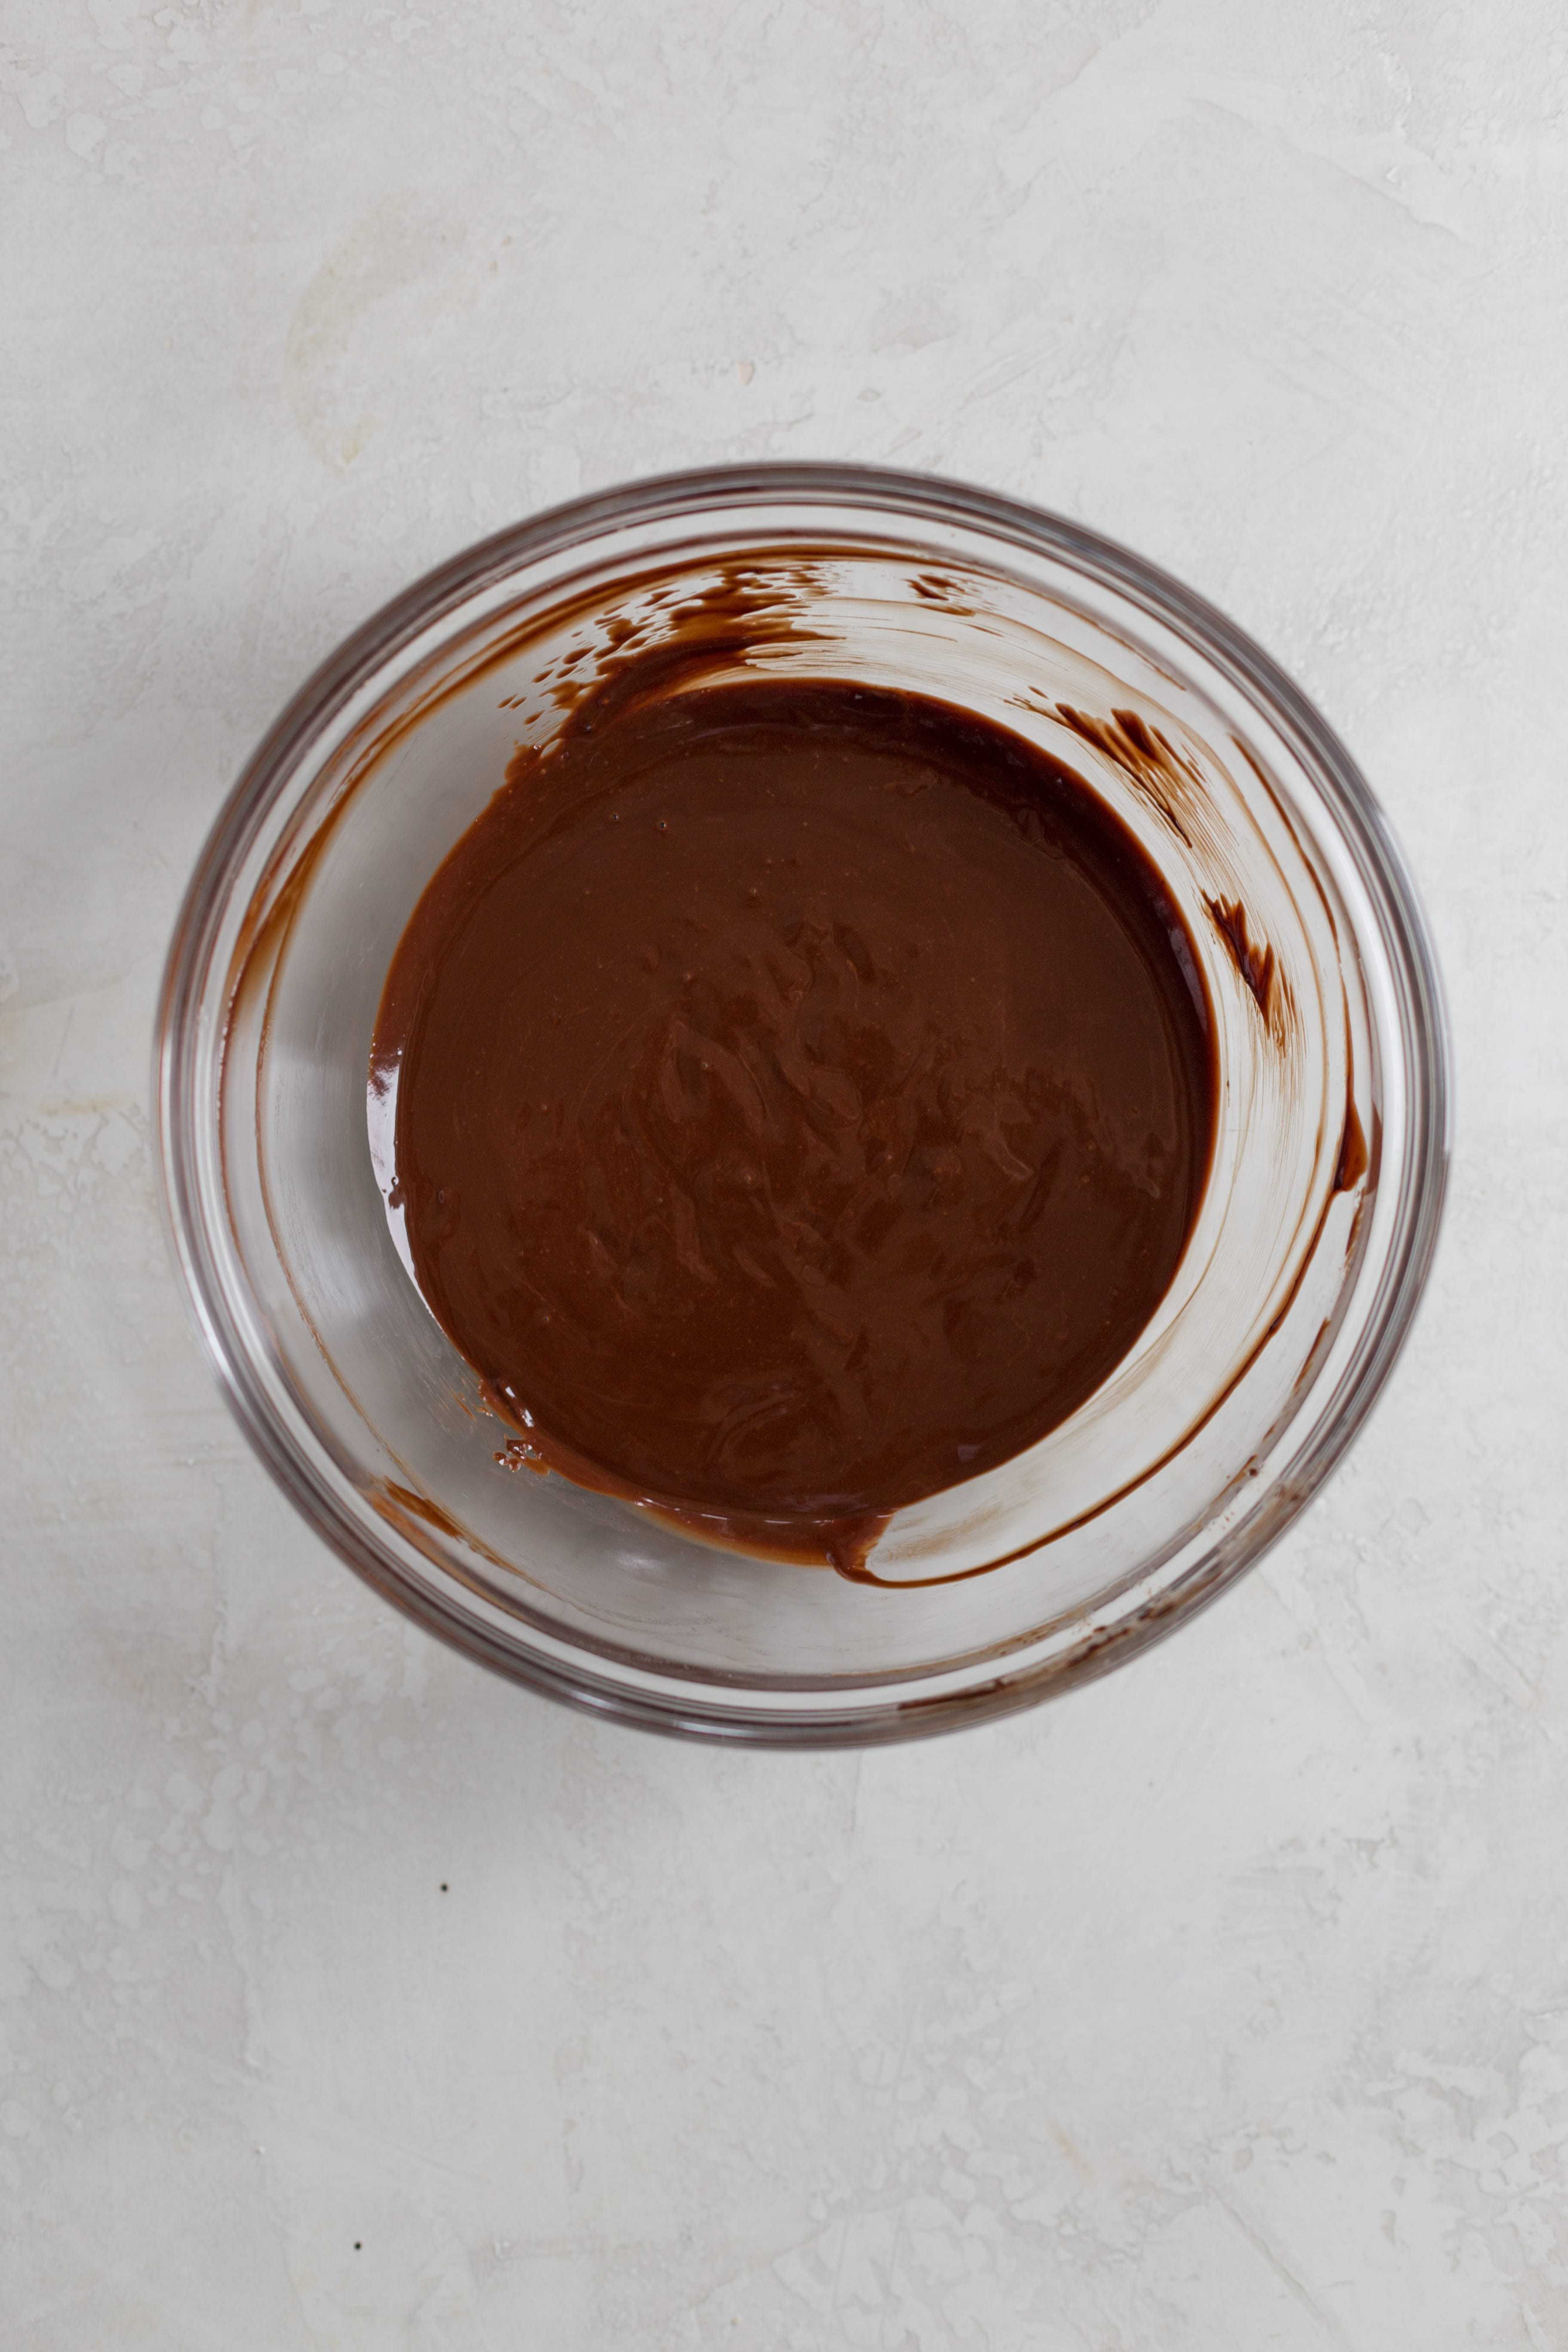 A glass bowl filled with melted chocolate